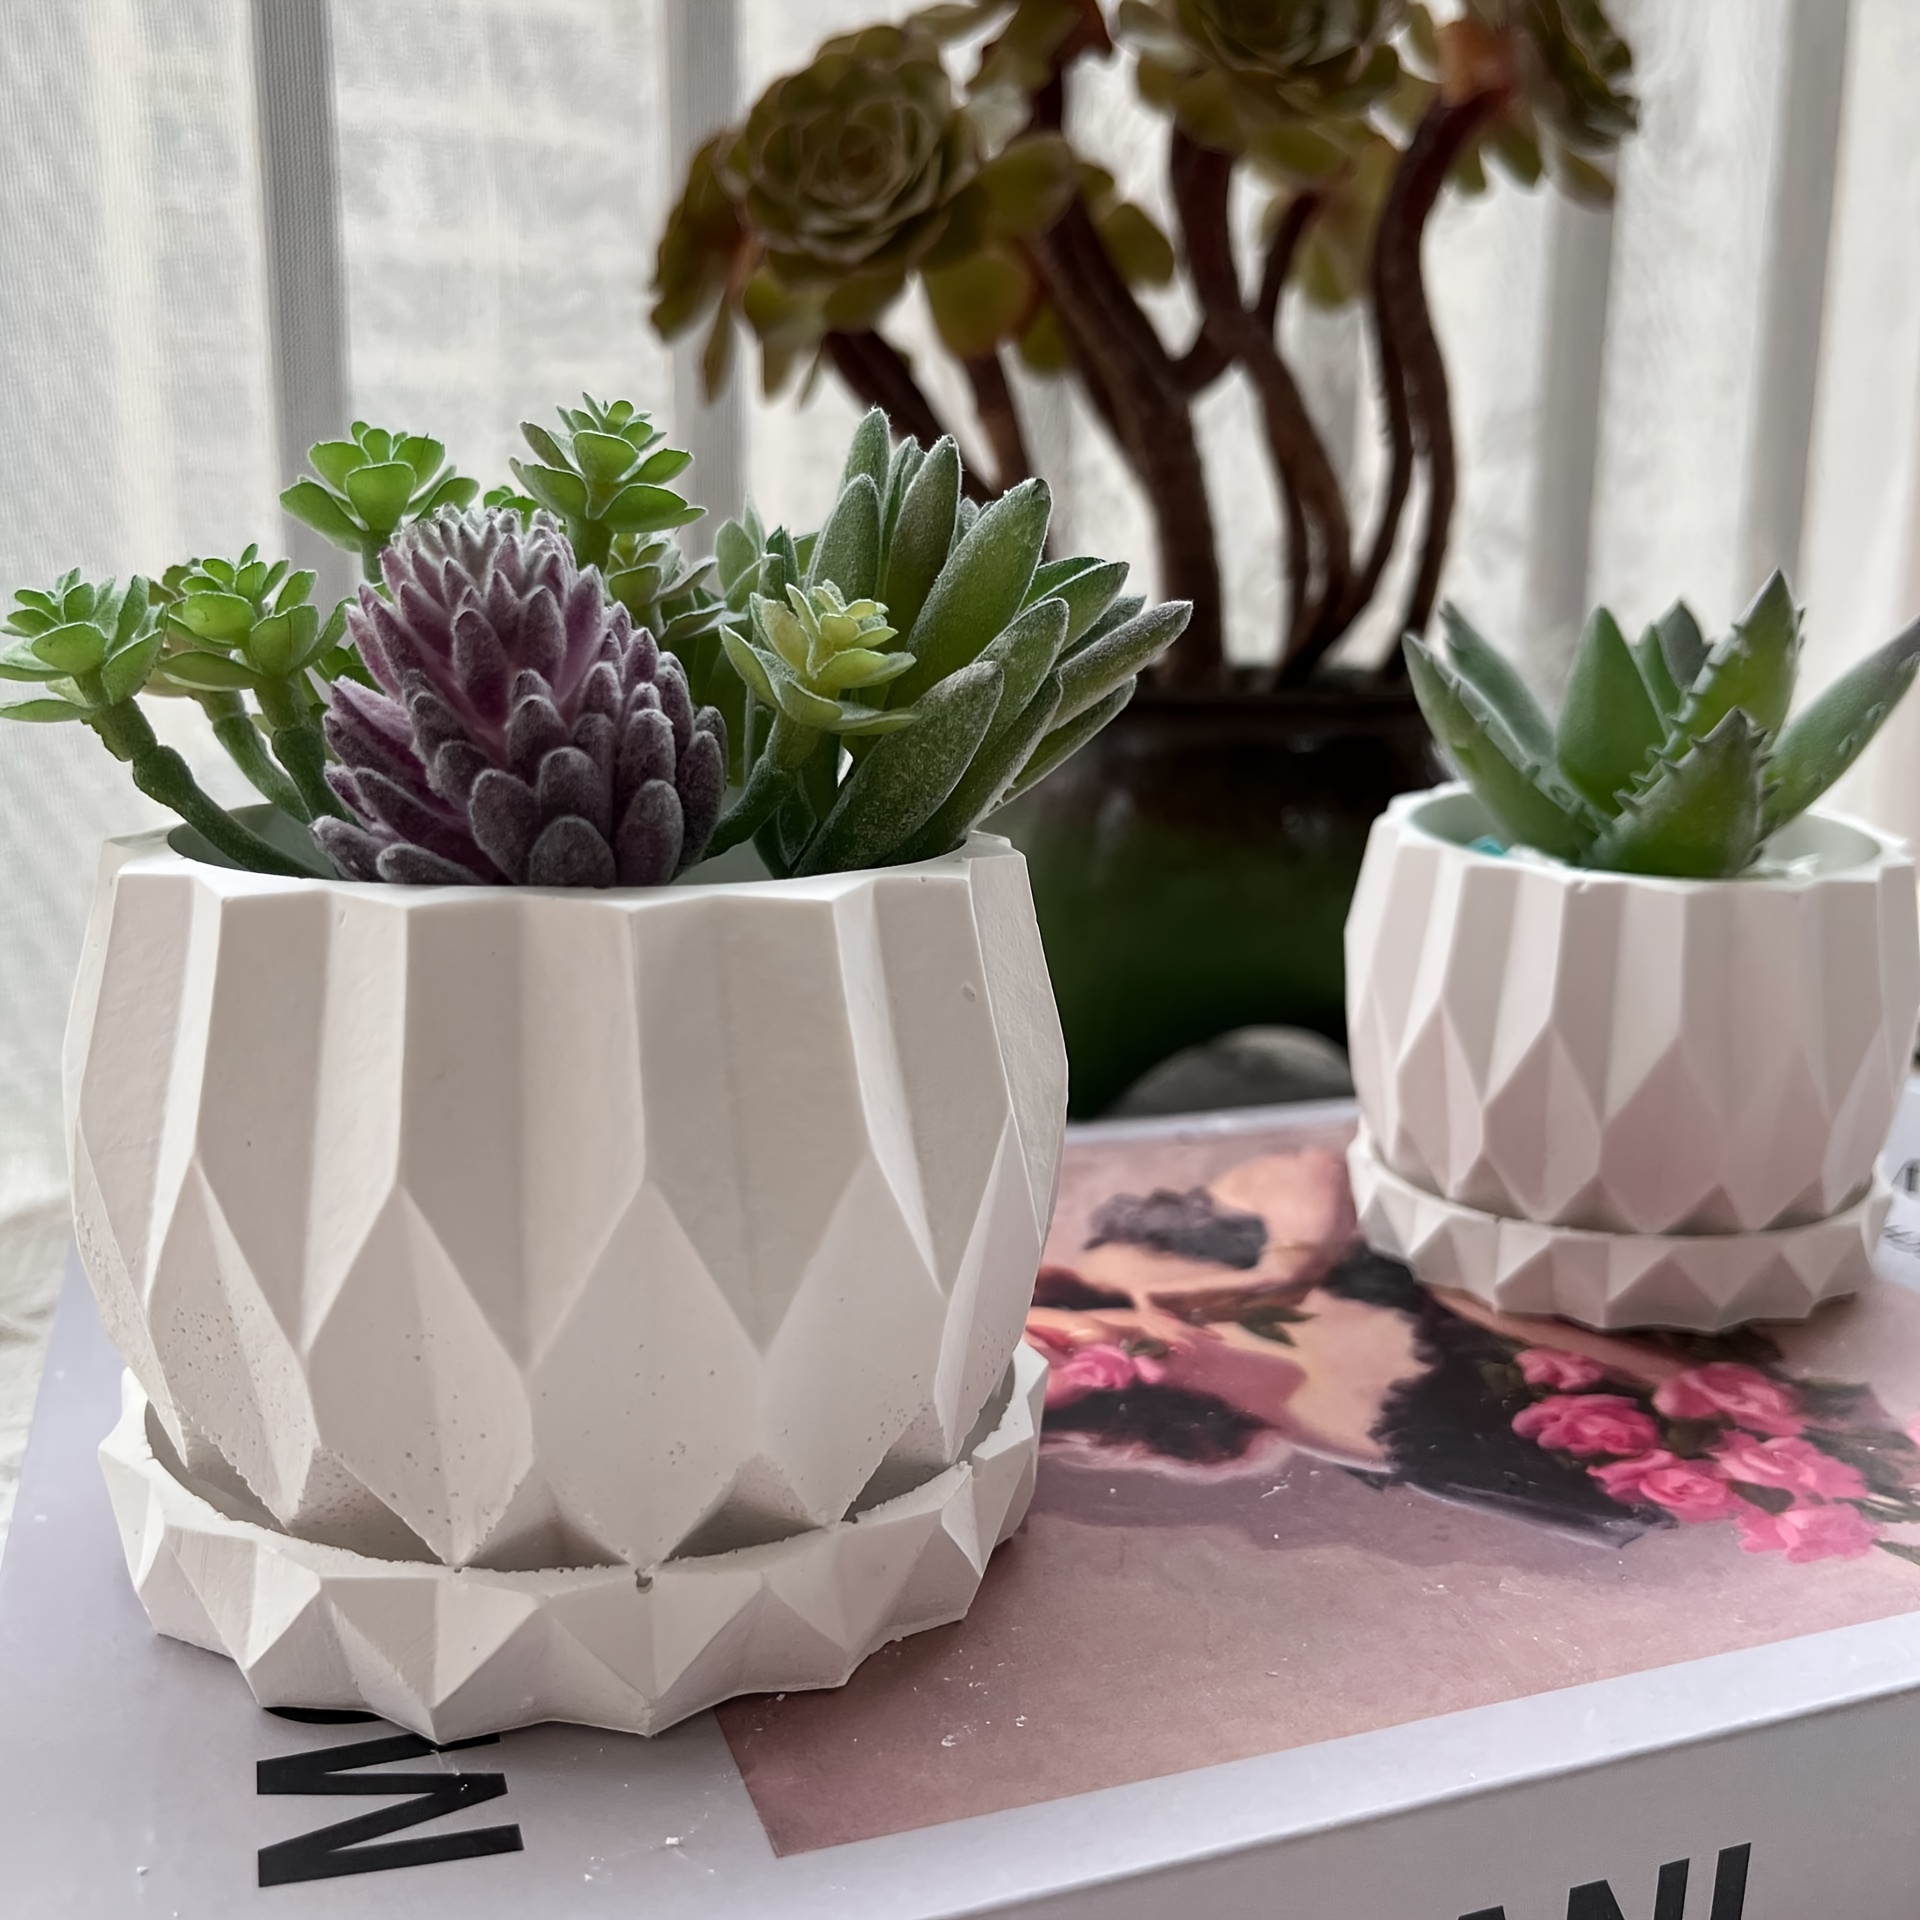 

Geometric Succulent Planter Set With Silicone Molds: Includes 2 Flowerpots, 2 Basins, And 2 Lids - Perfect For Crafting And Home Decor